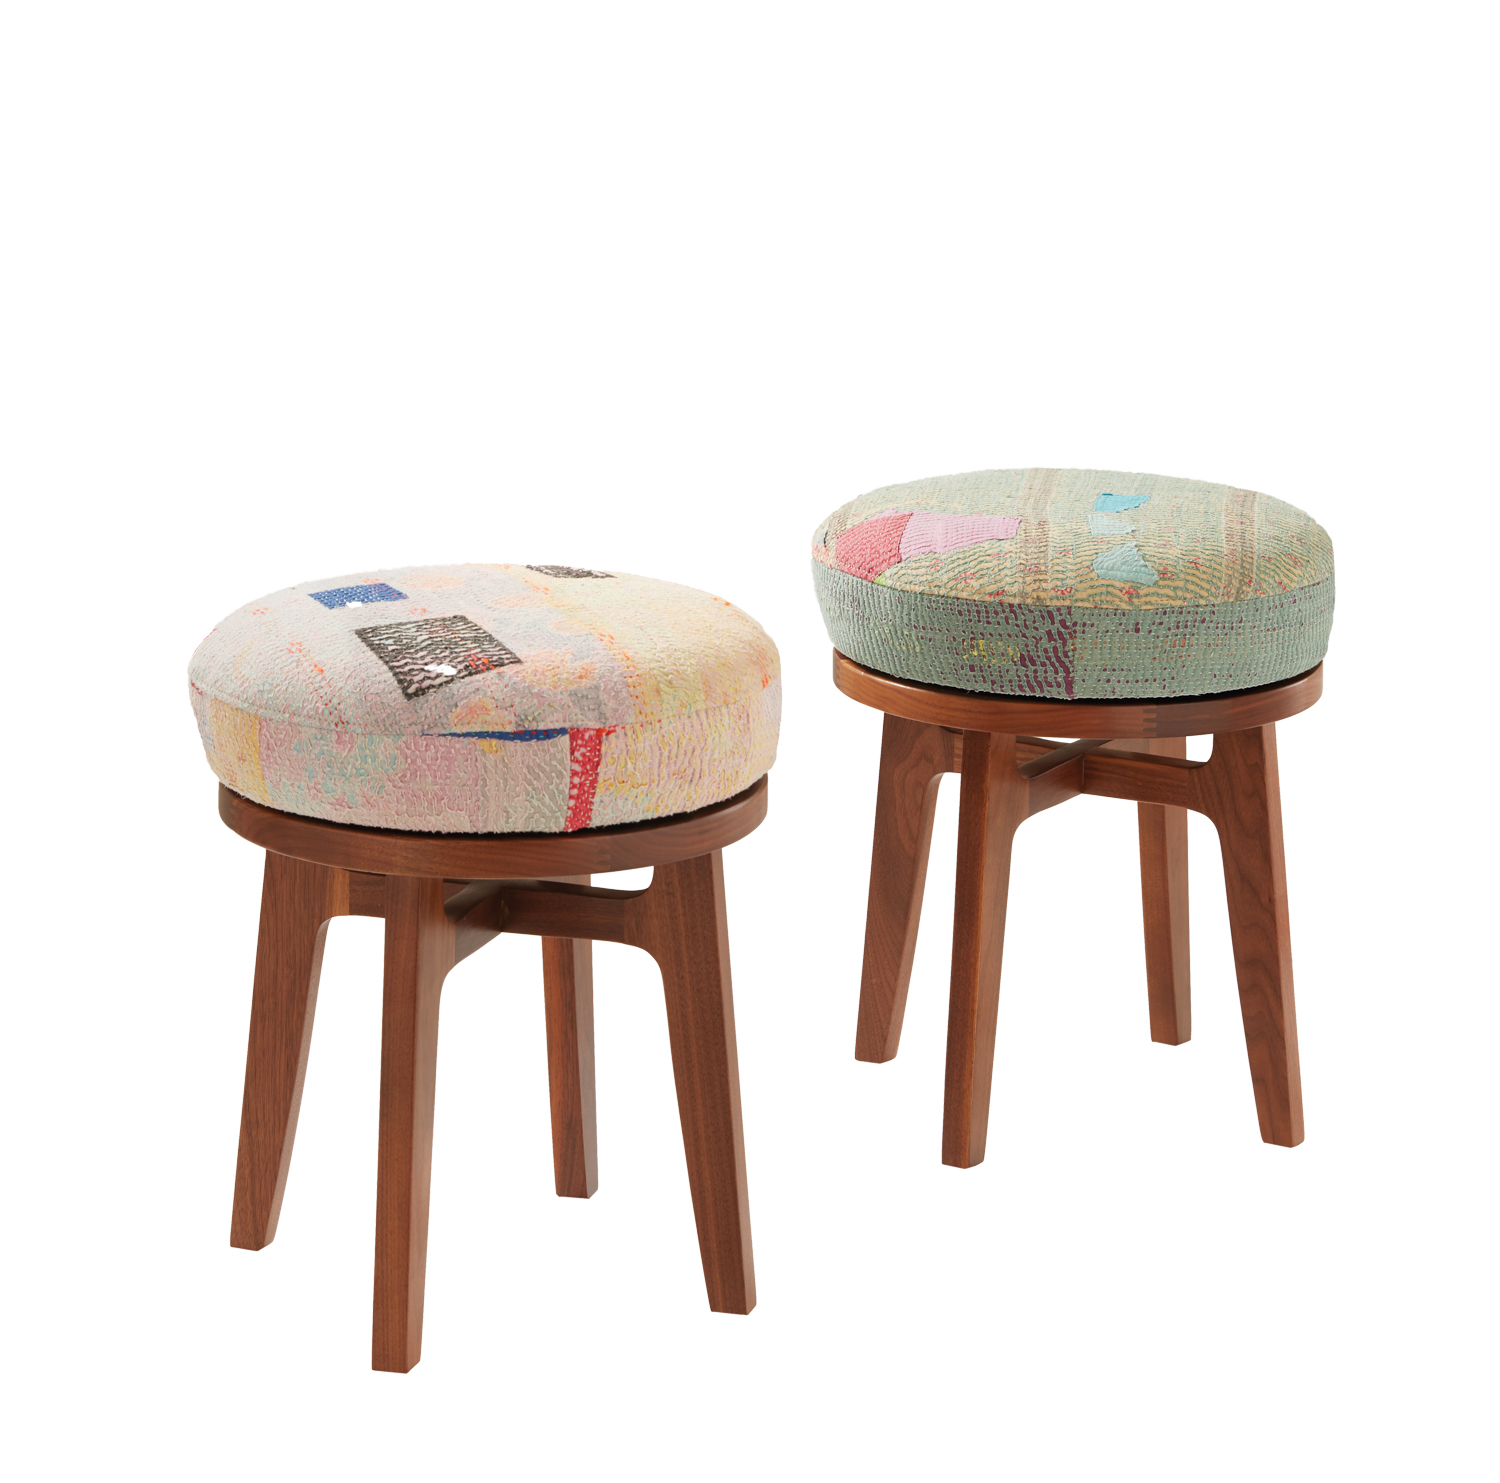 Colorful yet faded repurposed vintage textiles upholster stools with dark wooden bases from Aloka collection